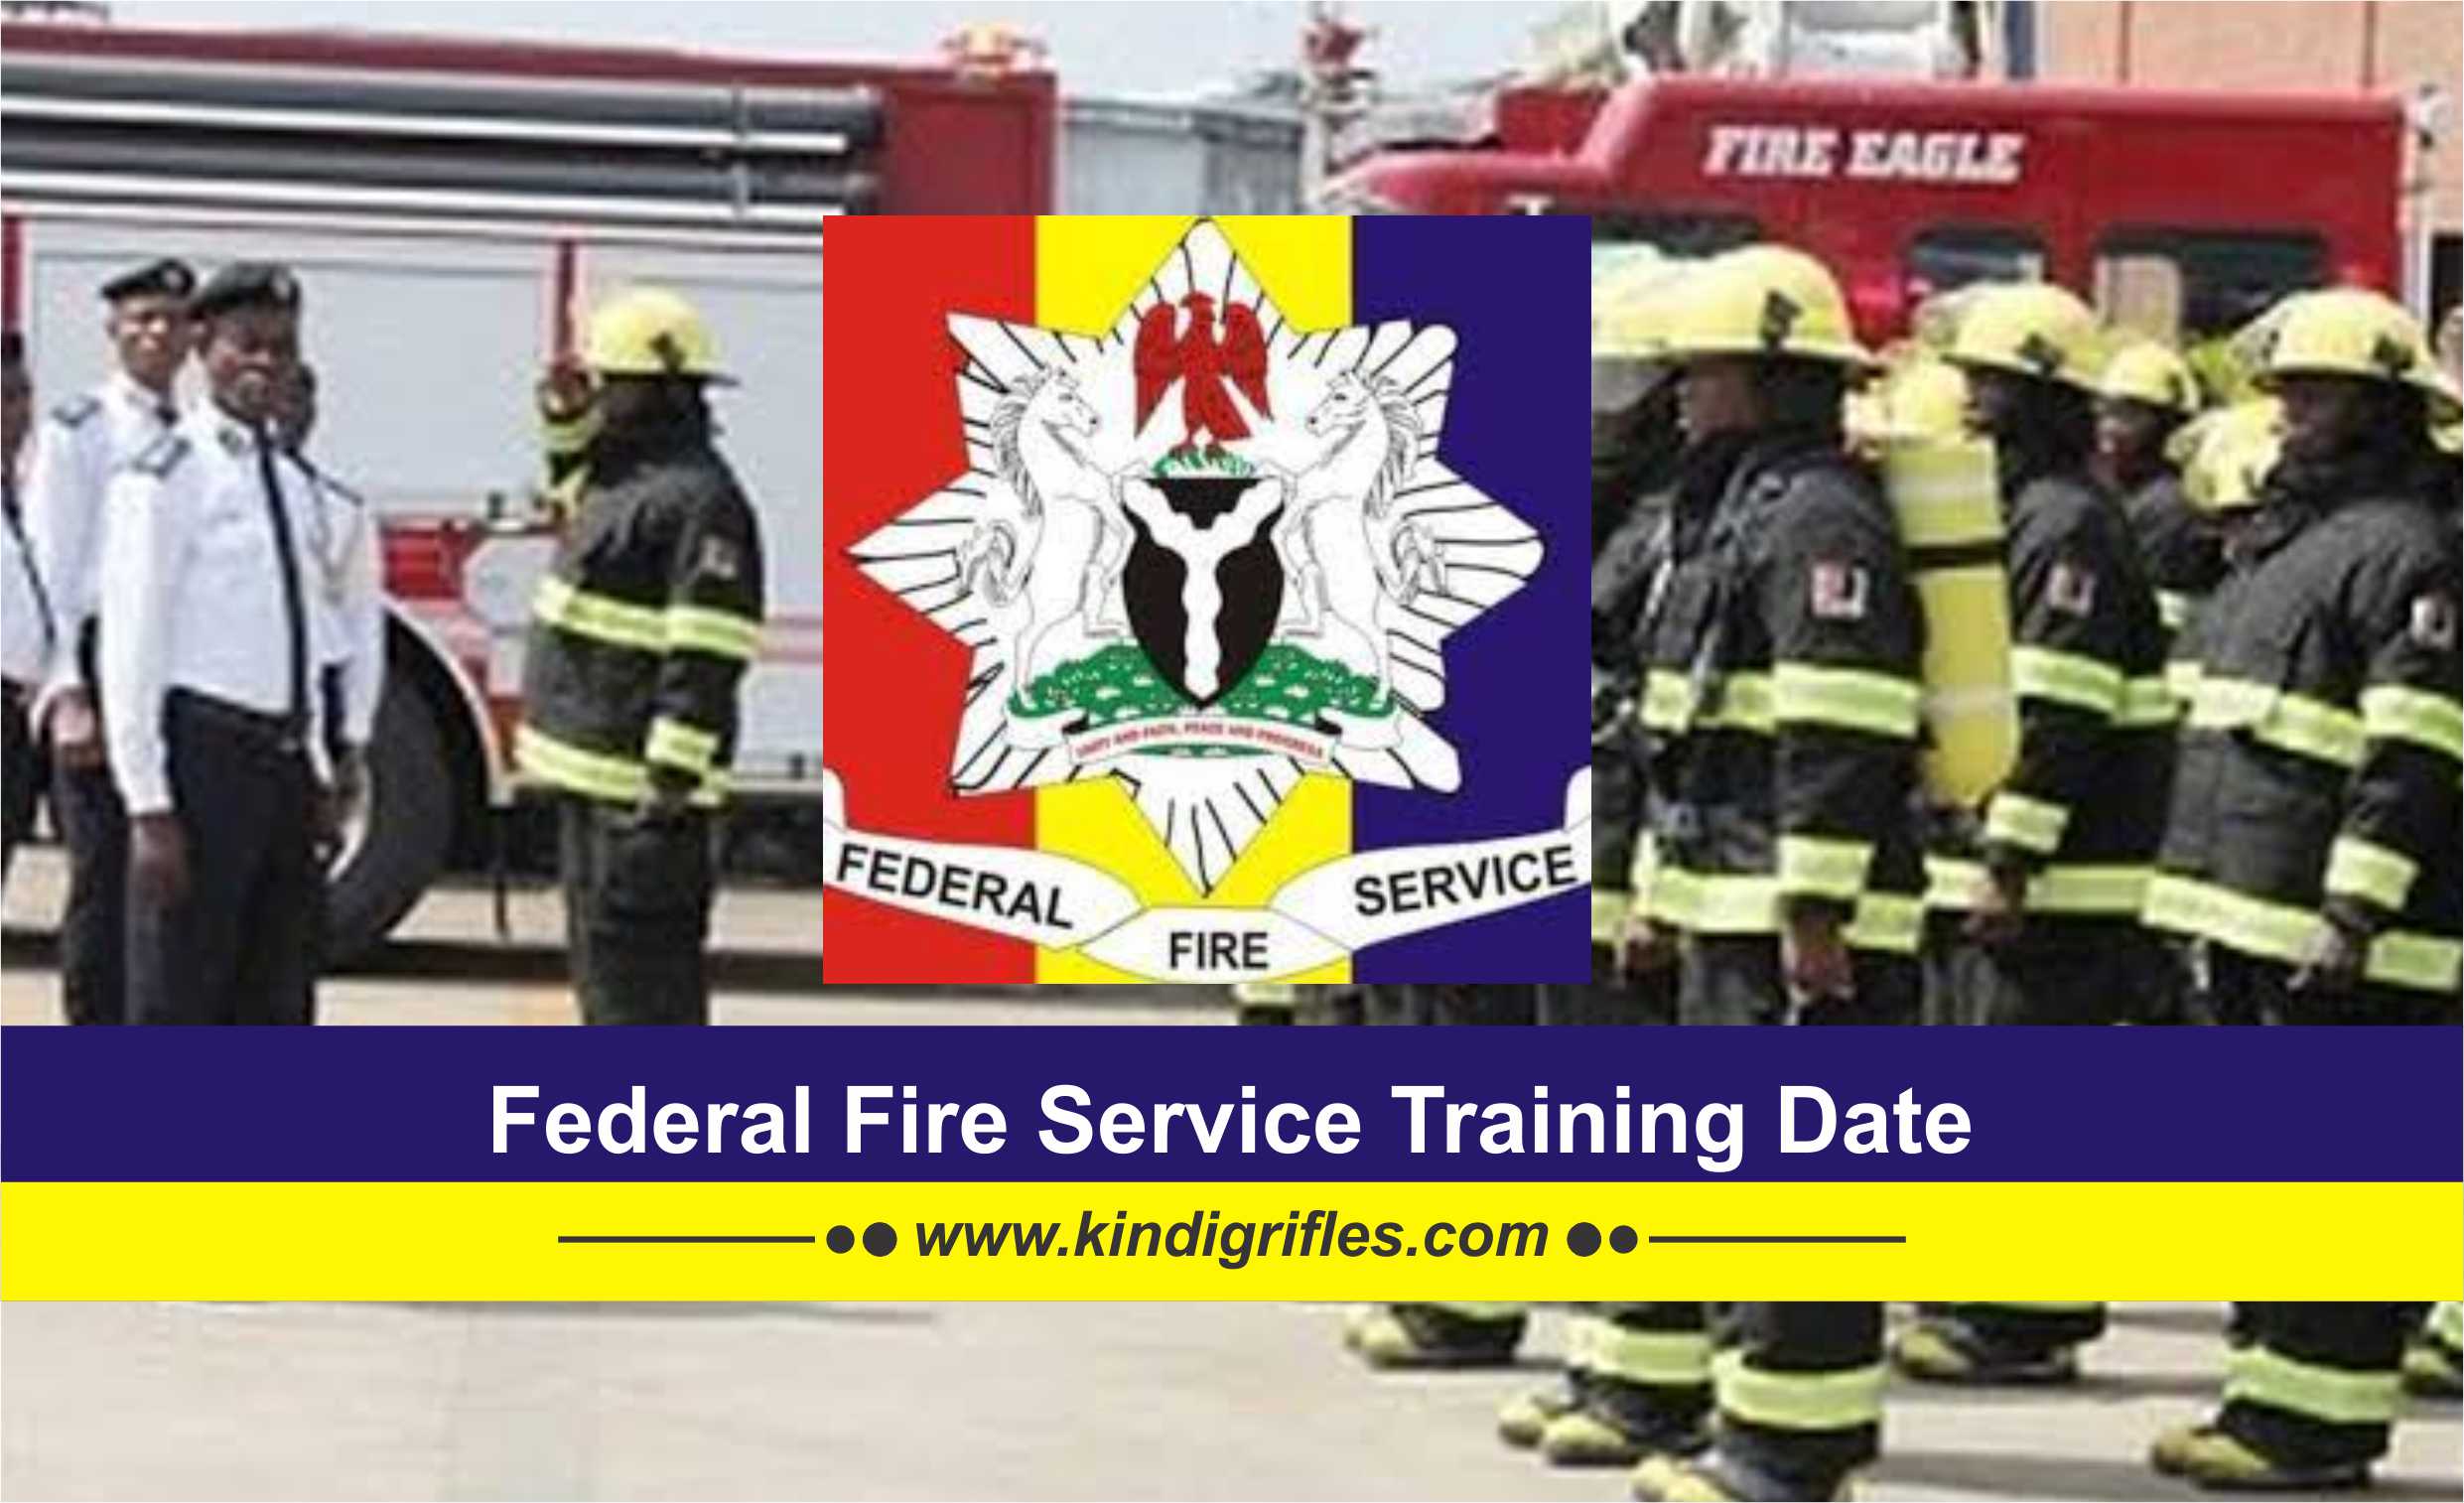 Federal Fire Service Training Date2